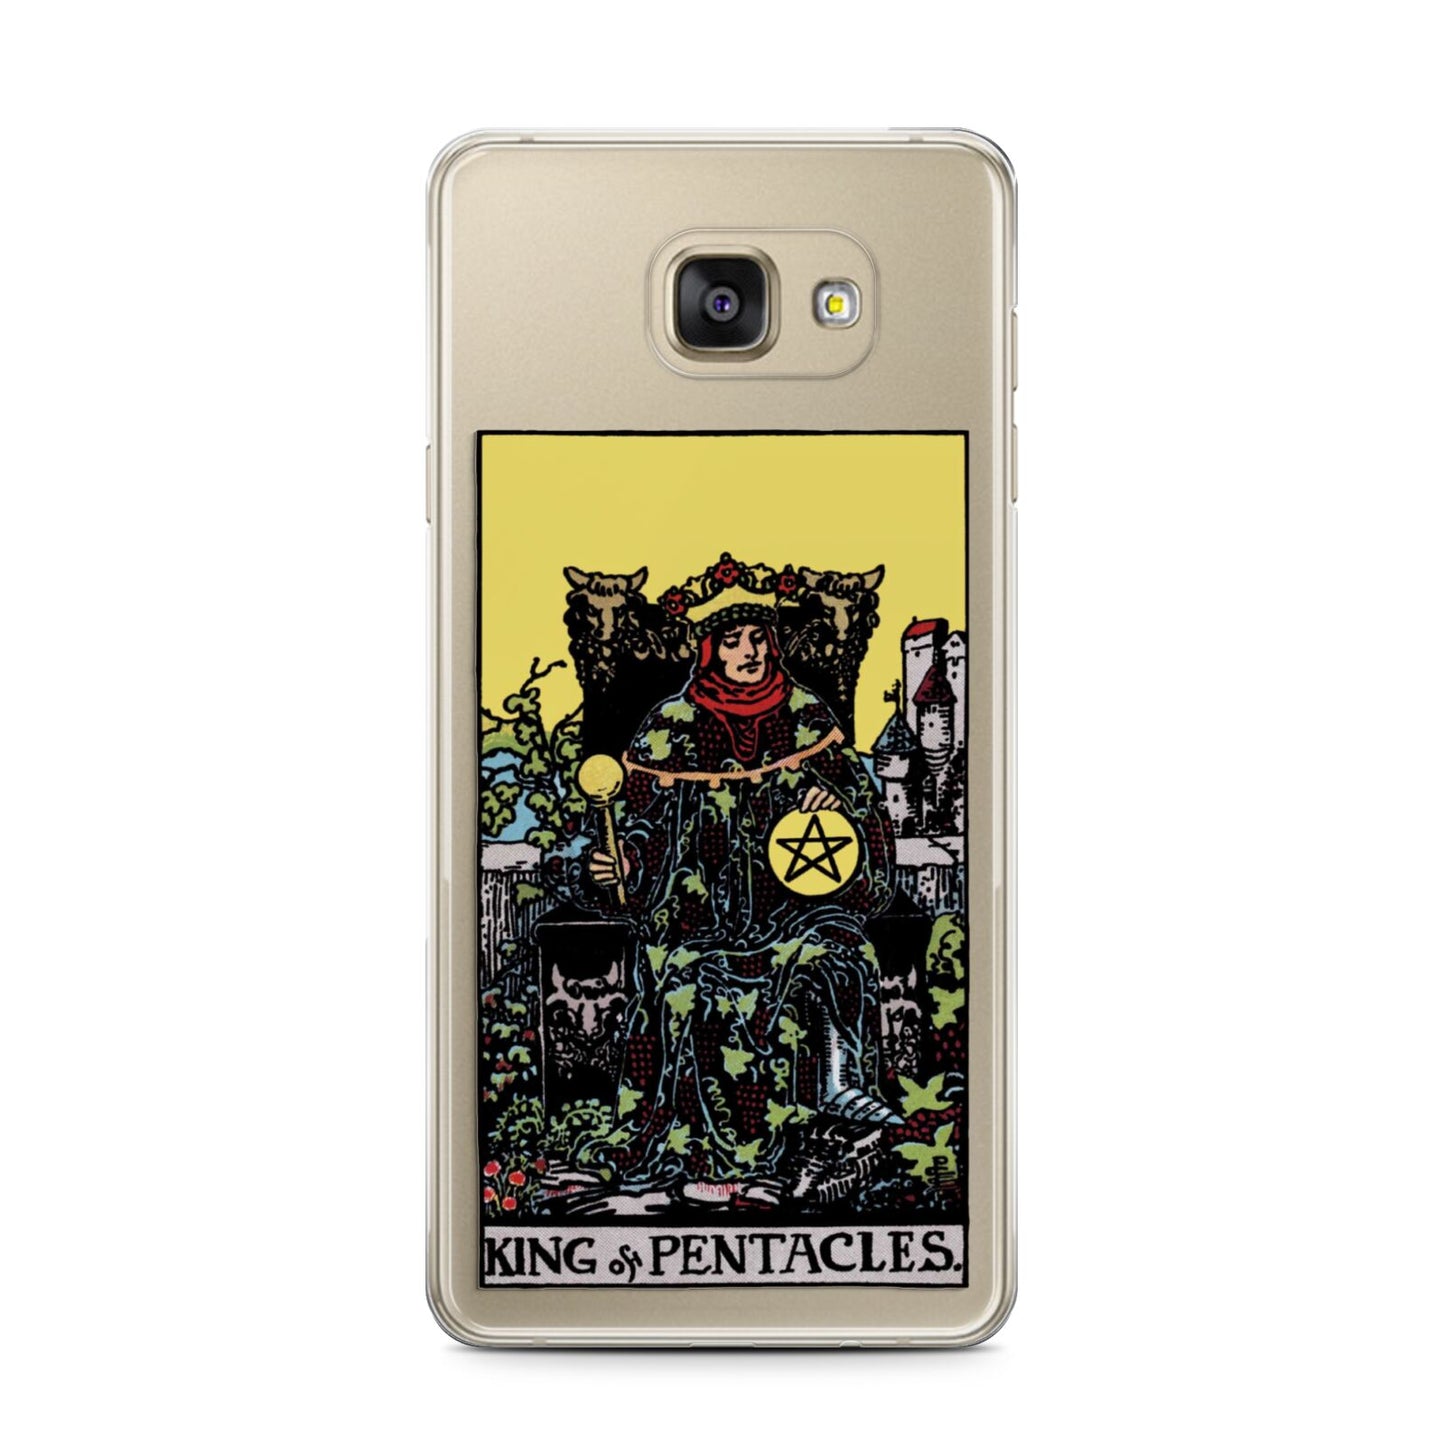 King of Pentacles Tarot Card Samsung Galaxy A7 2016 Case on gold phone